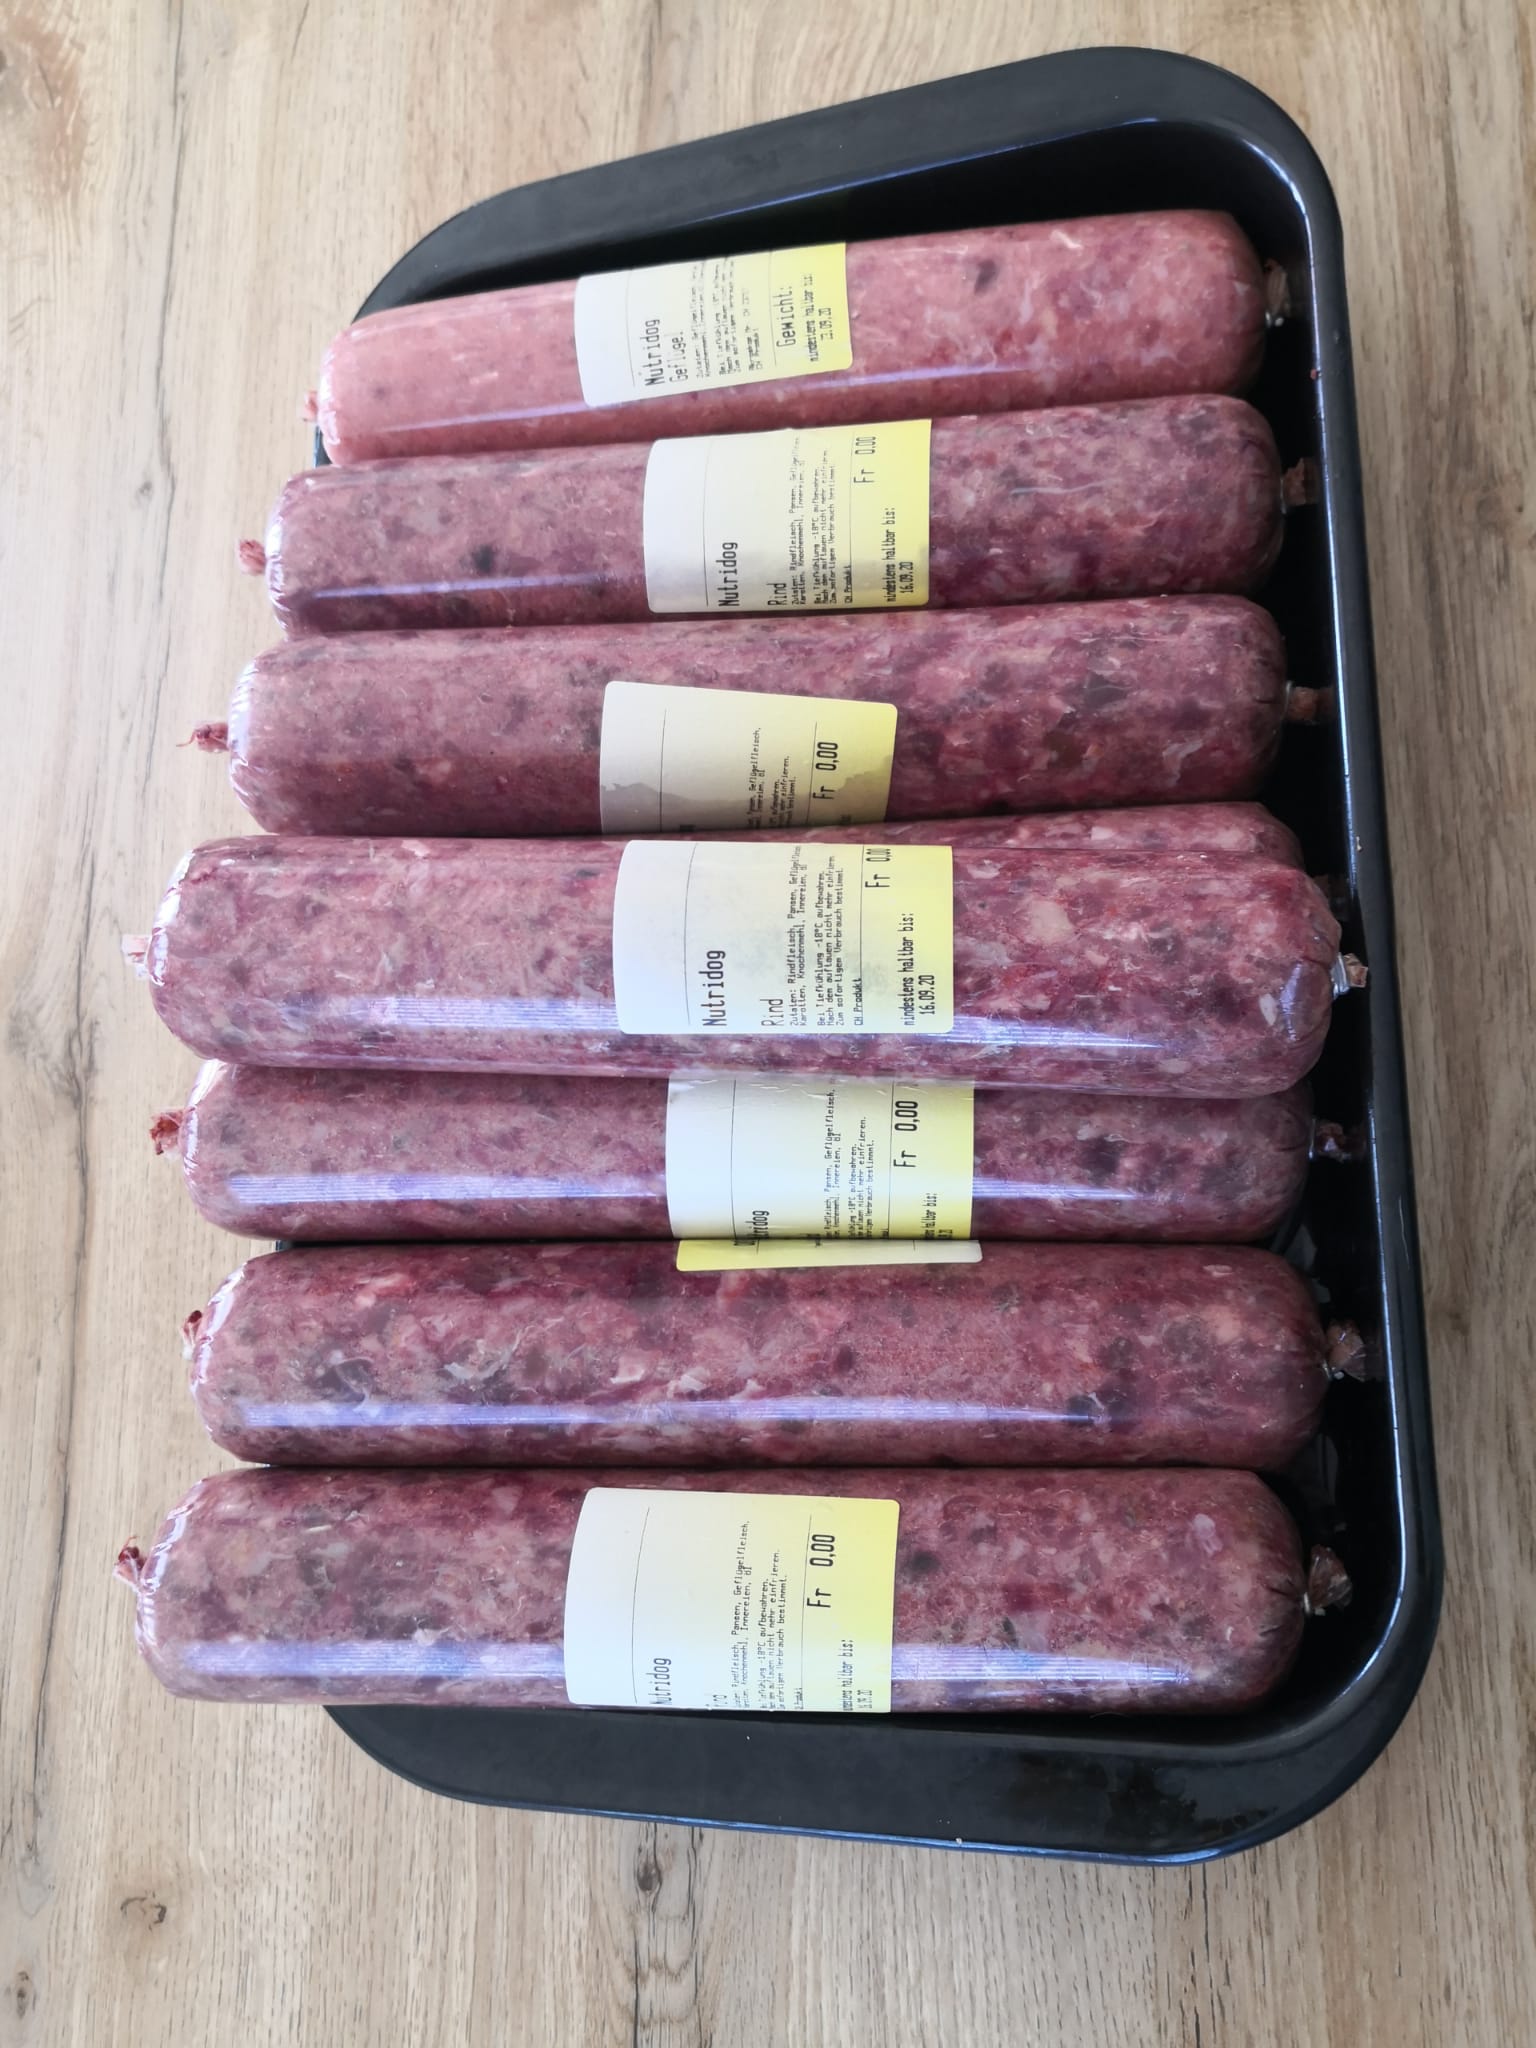 Lamb Mixed 500g per sausage only 8.90.- "Frozen".